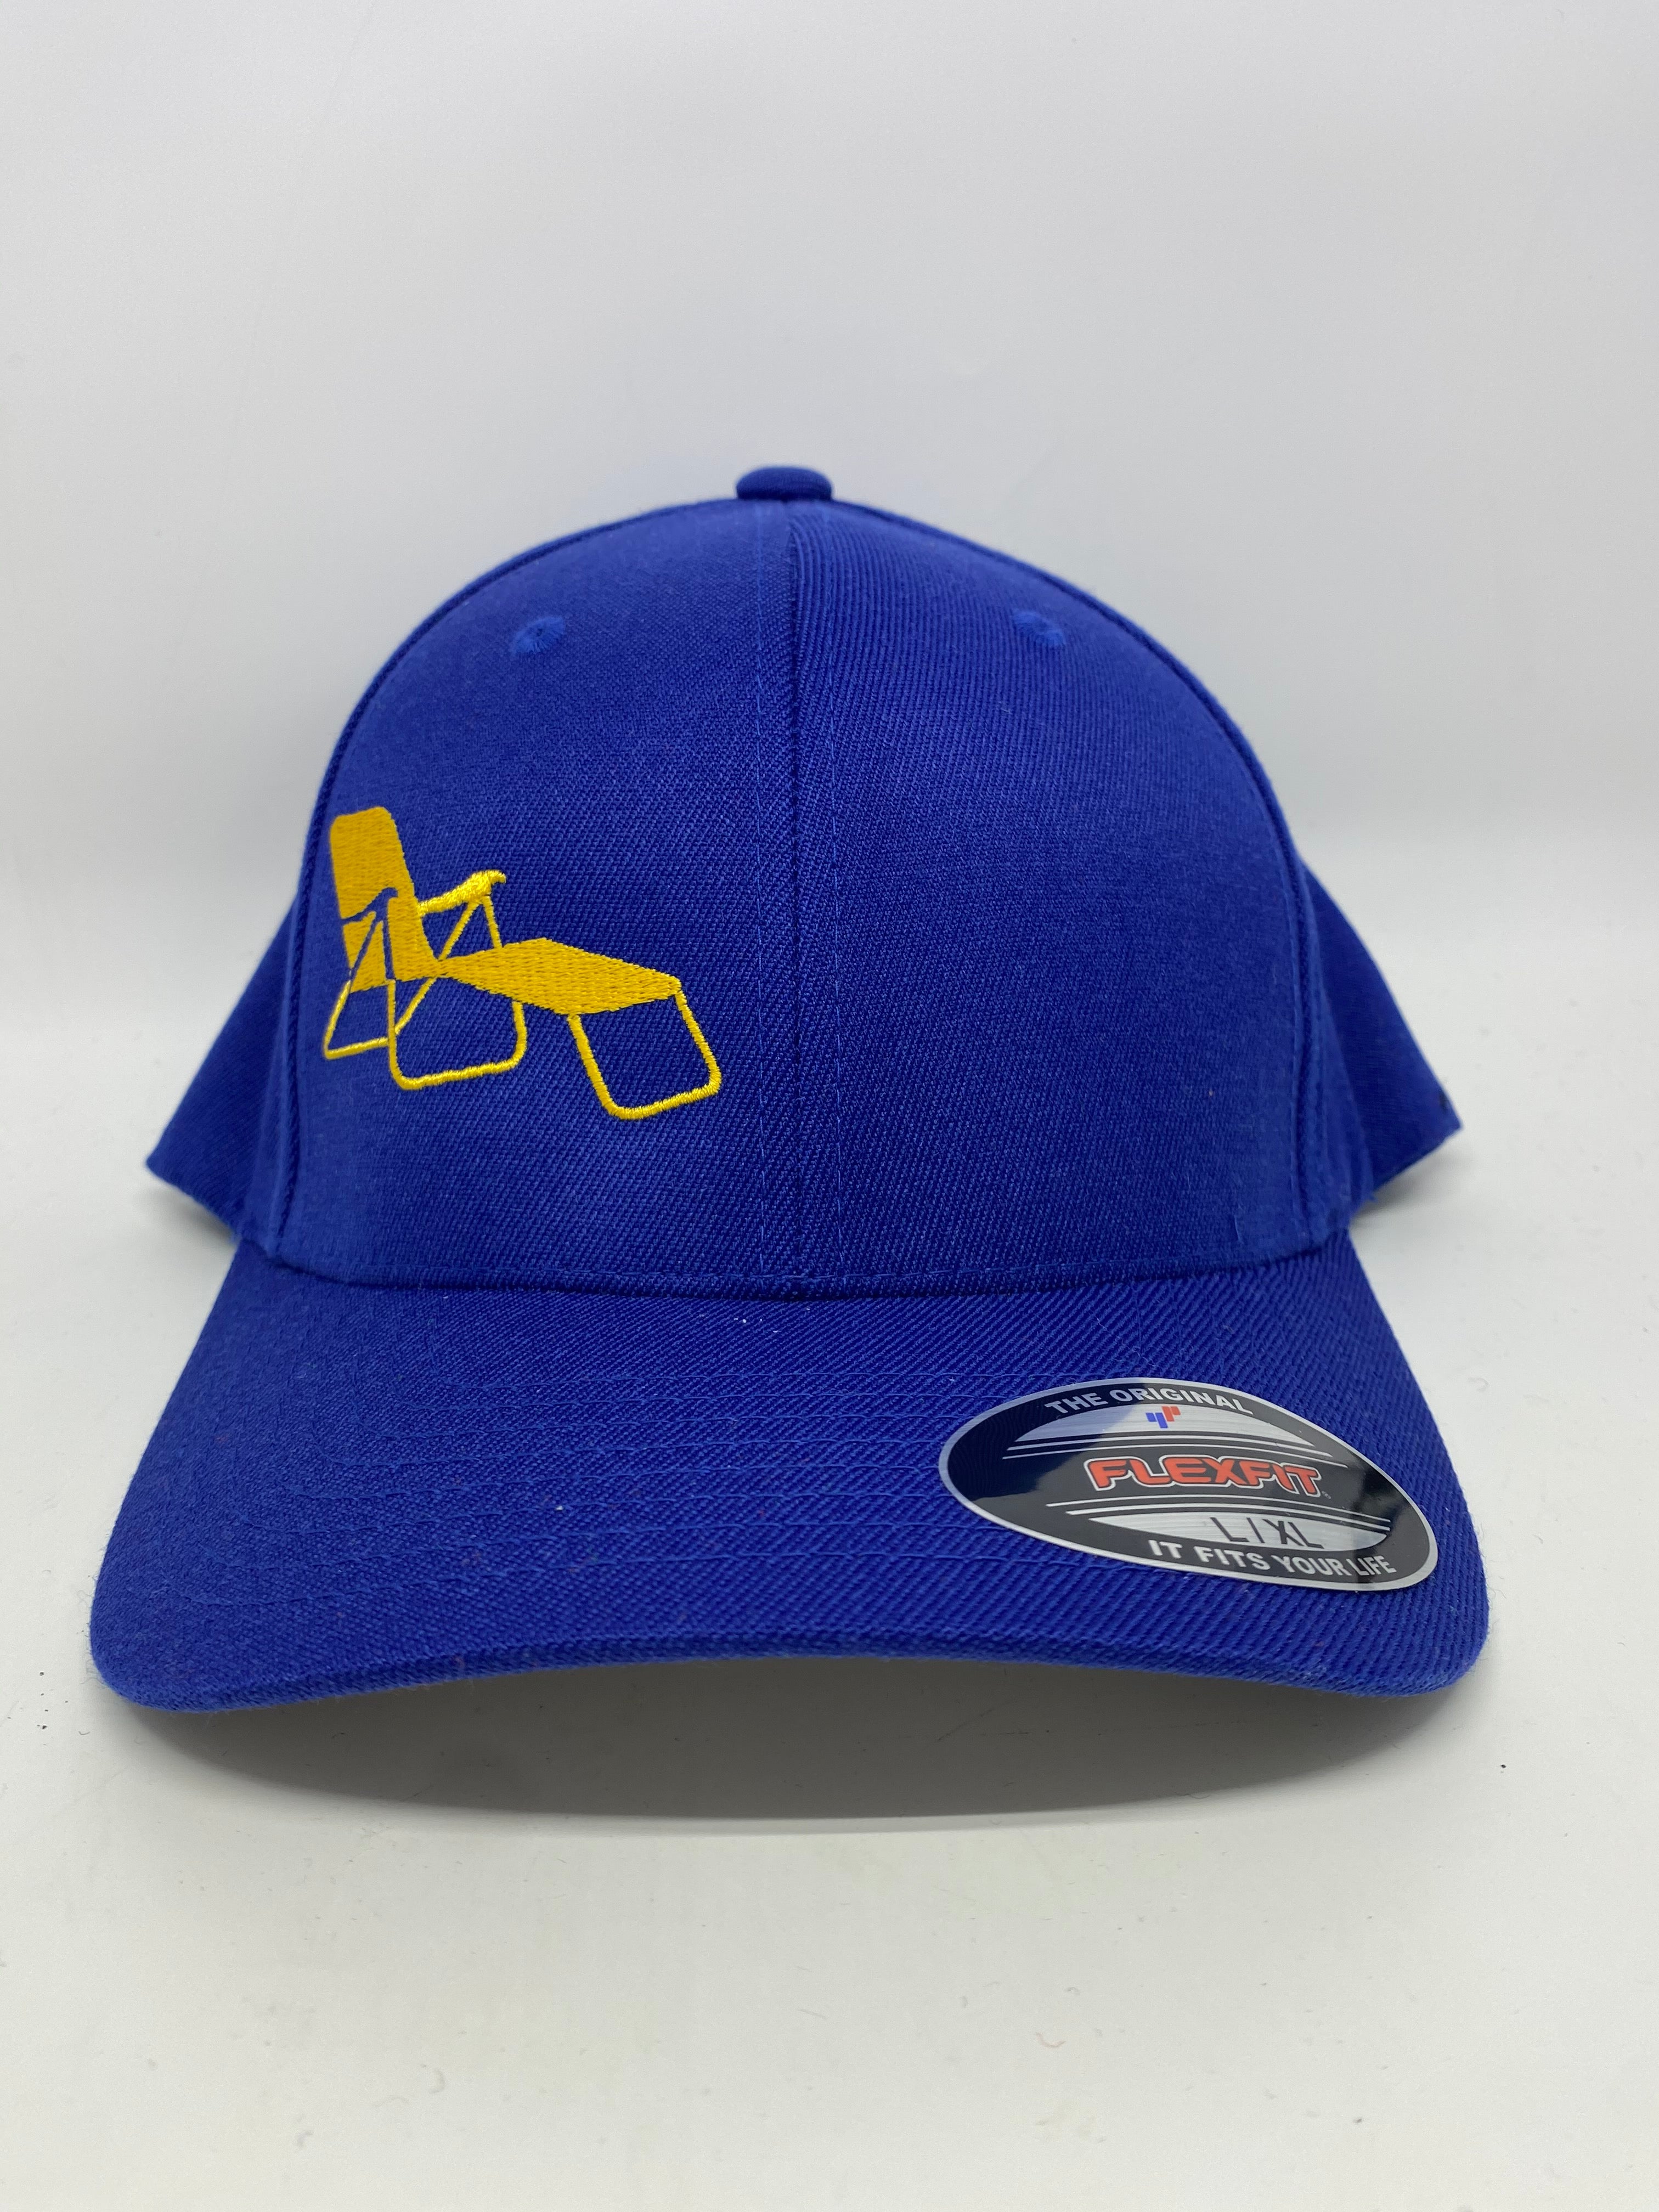 rideSFO LoungeChairLife Classic Hat Gold/Blue